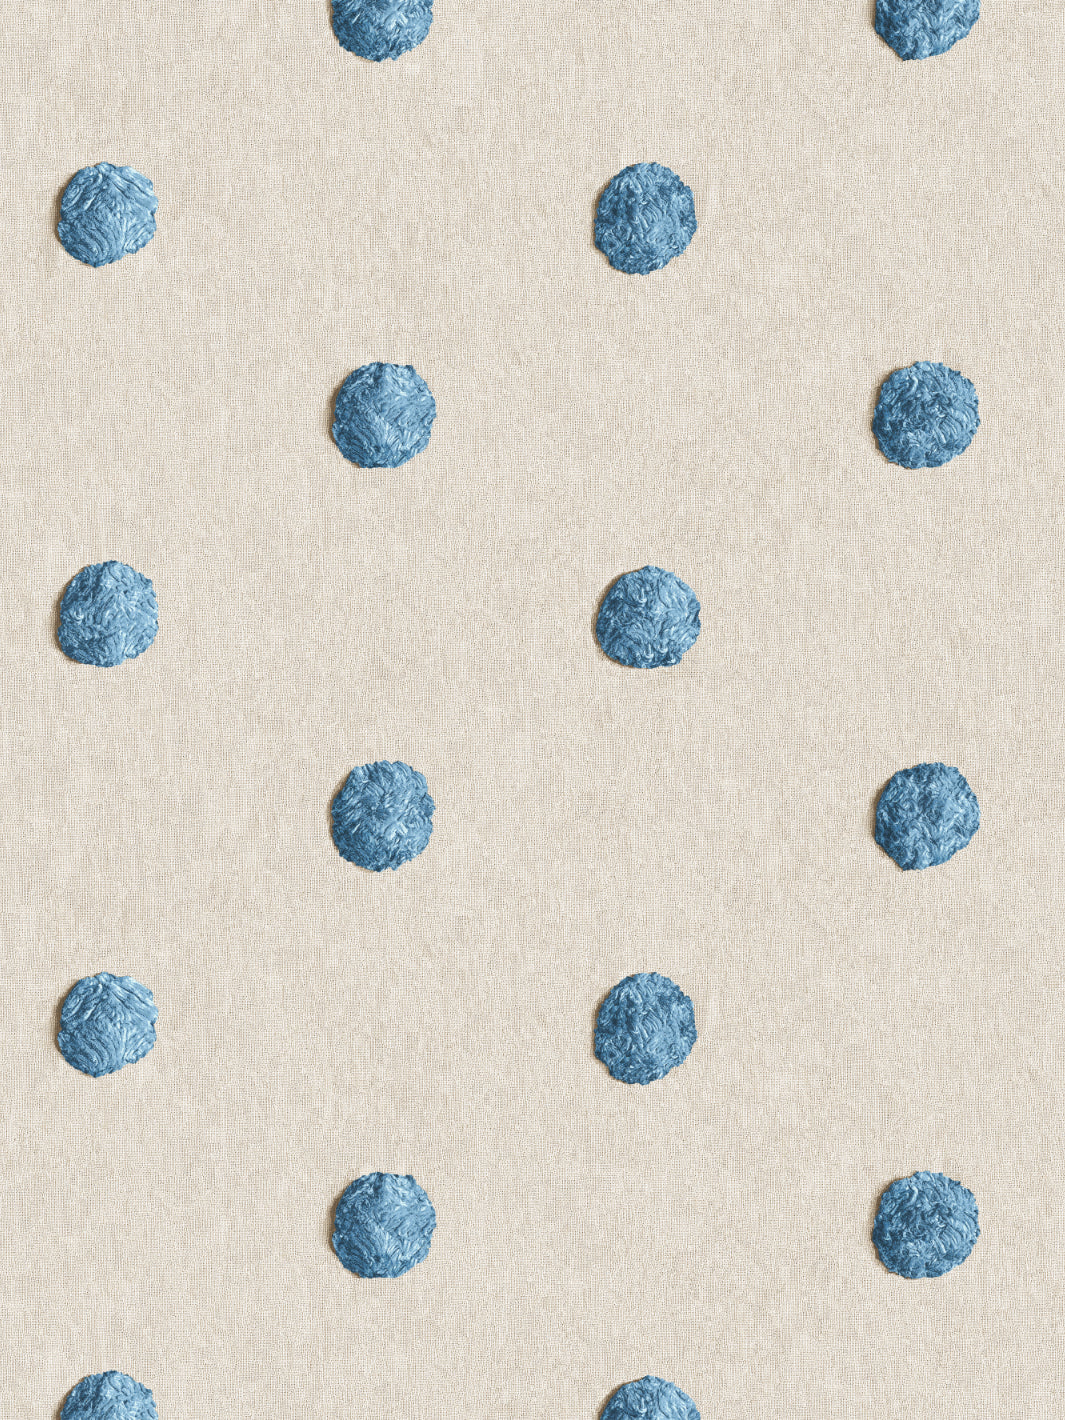 'Chenille Dots Small' Wallpaper by Chris Benz - Blue